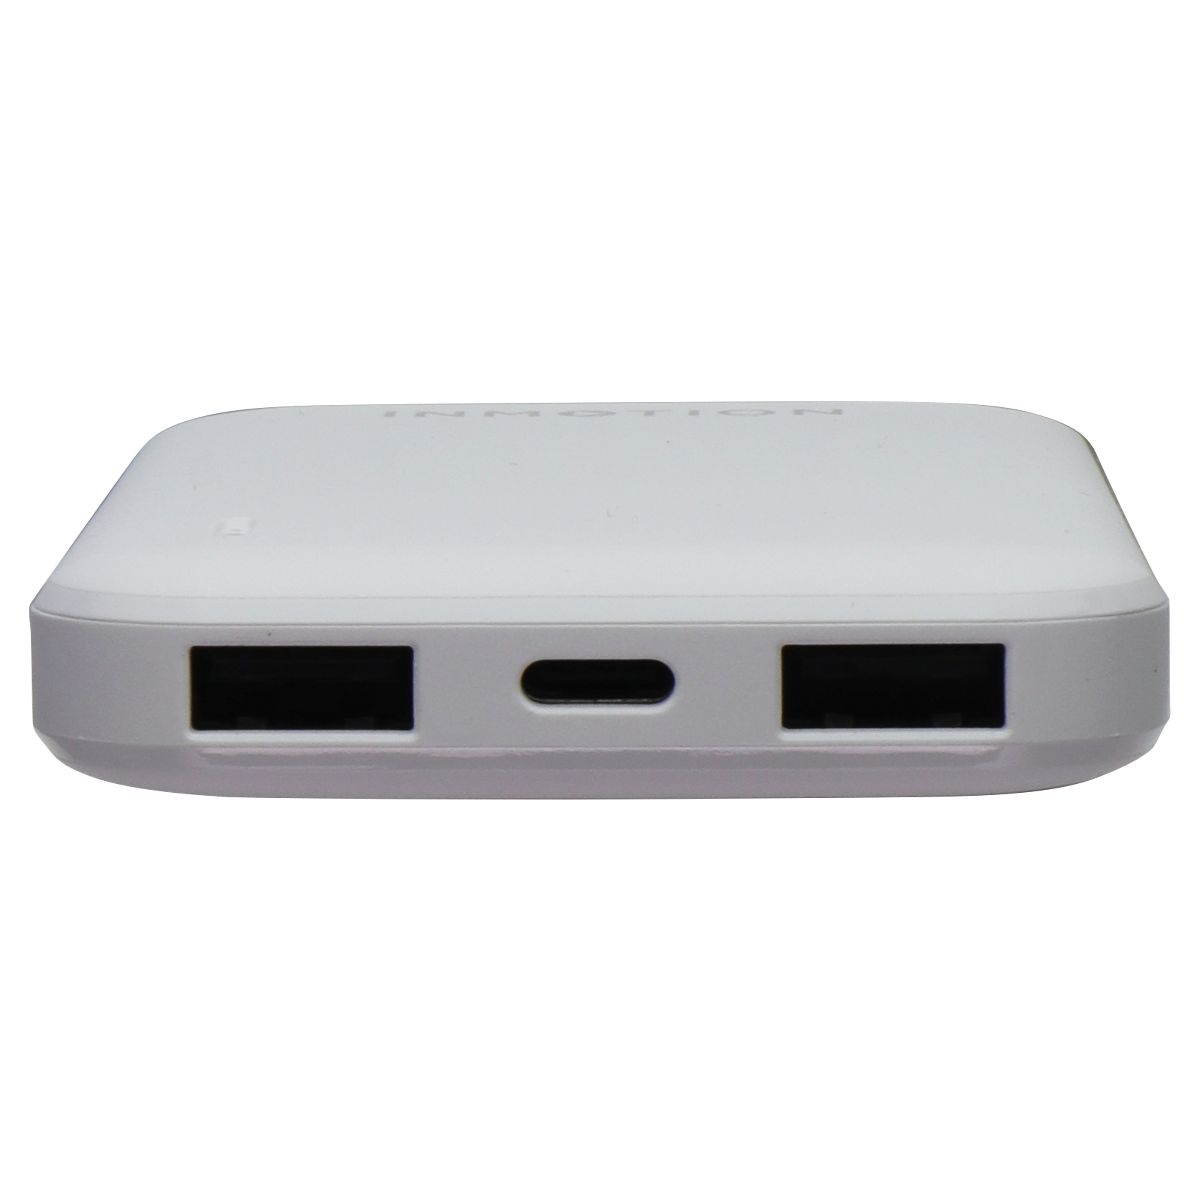 InMotion Power Bank with two USB-A ports 5000mAh (2877839) - White Cell Phone - Chargers & Cradles InMotion    - Simple Cell Bulk Wholesale Pricing - USA Seller